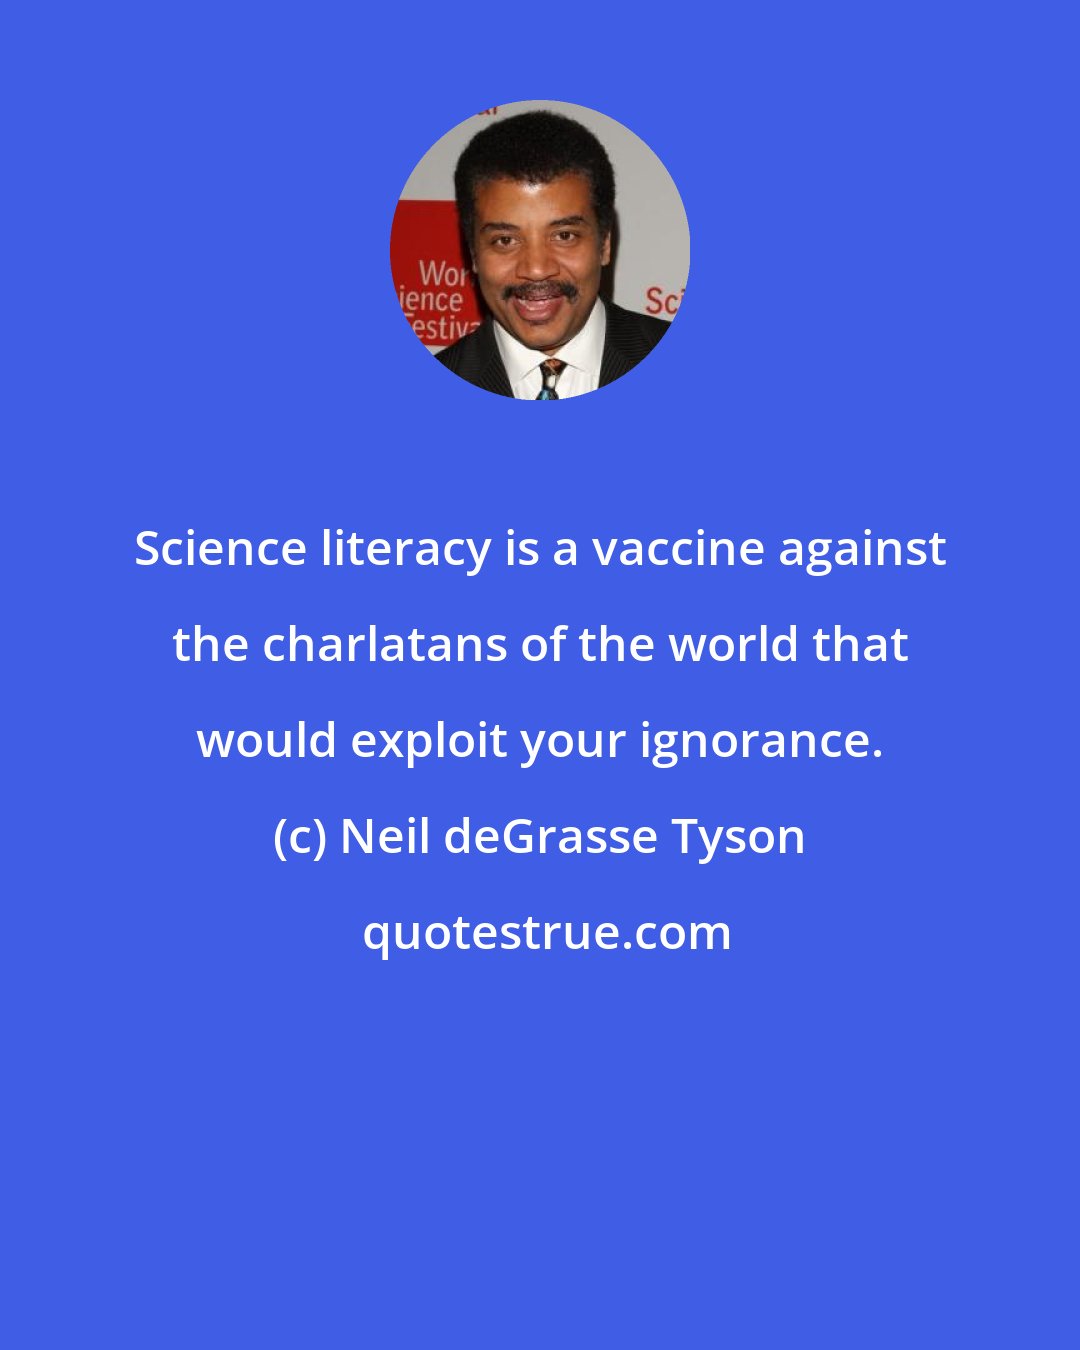 Neil deGrasse Tyson: Science literacy is a vaccine against the charlatans of the world that would exploit your ignorance.